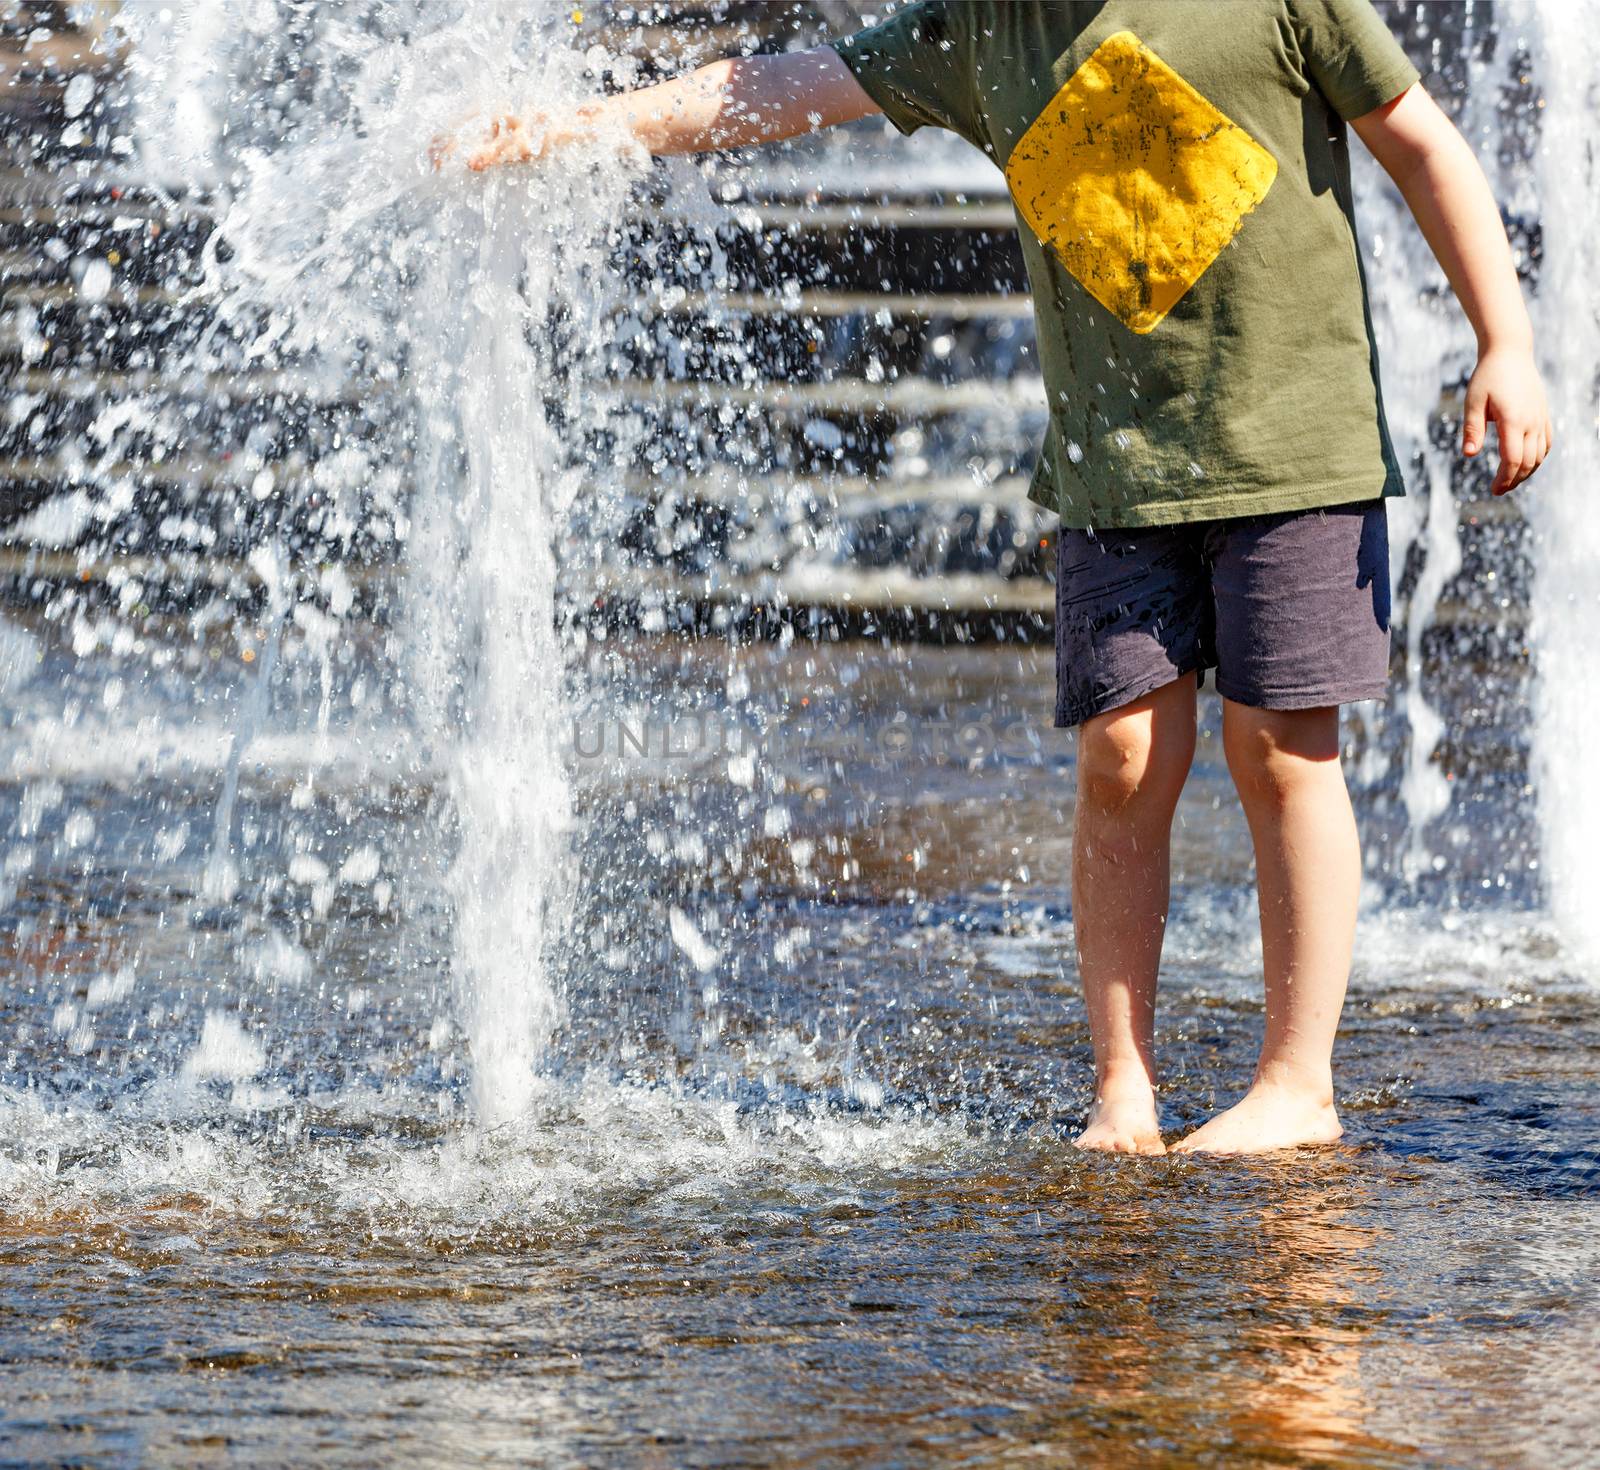 A teenager walks barefoot by the city fountain and tries to grab a powerful stream of water with his hand on a hot summer day.